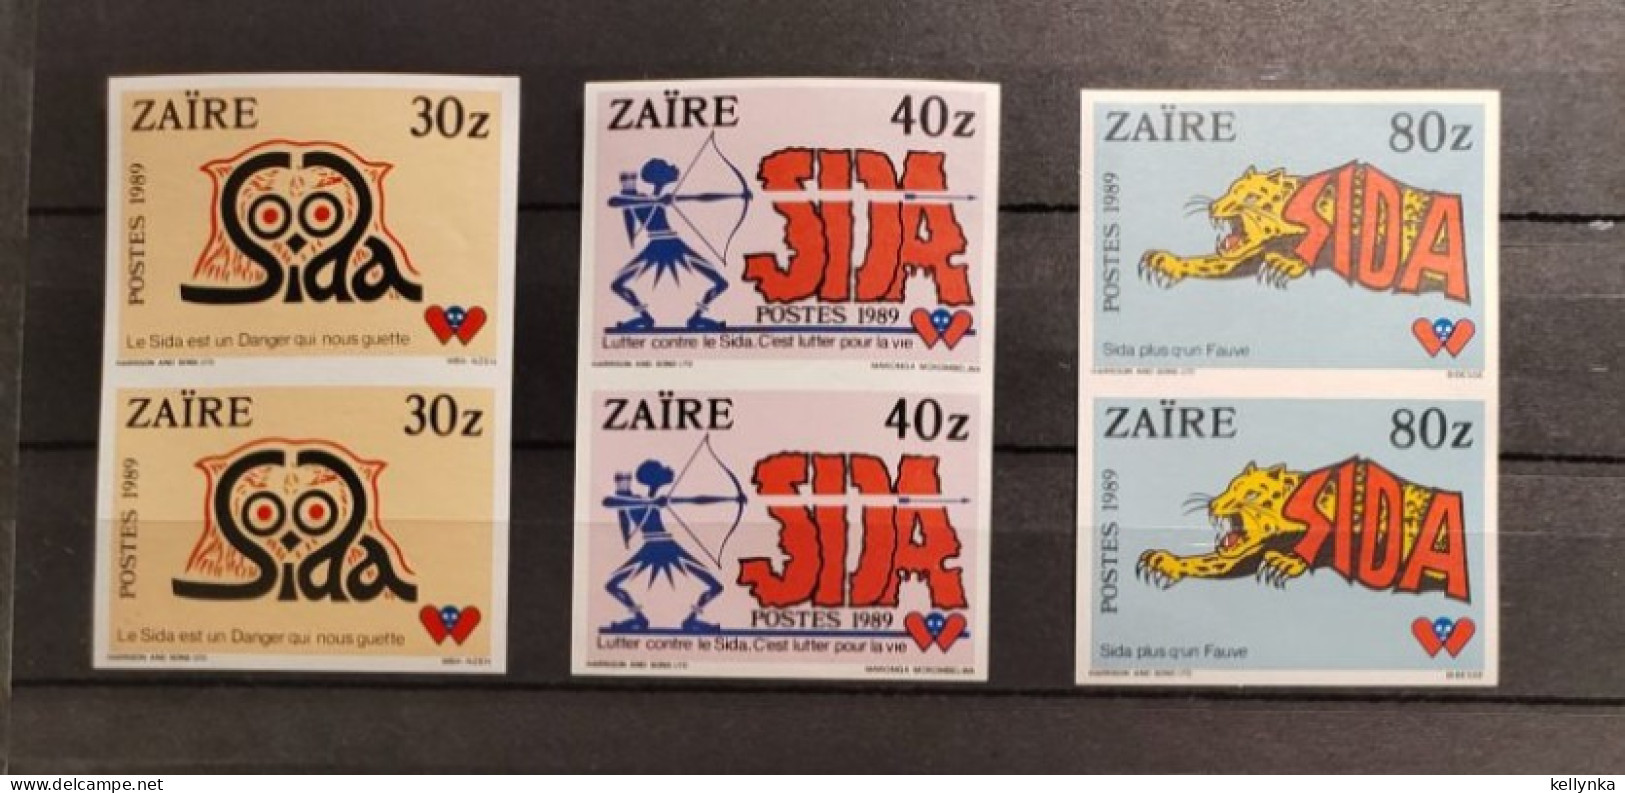 Zaïre - 1335/1337 - En Paire - Non Dentelé - Ongetand - Imperforated - Sida - 1990 - MNH - Unused Stamps